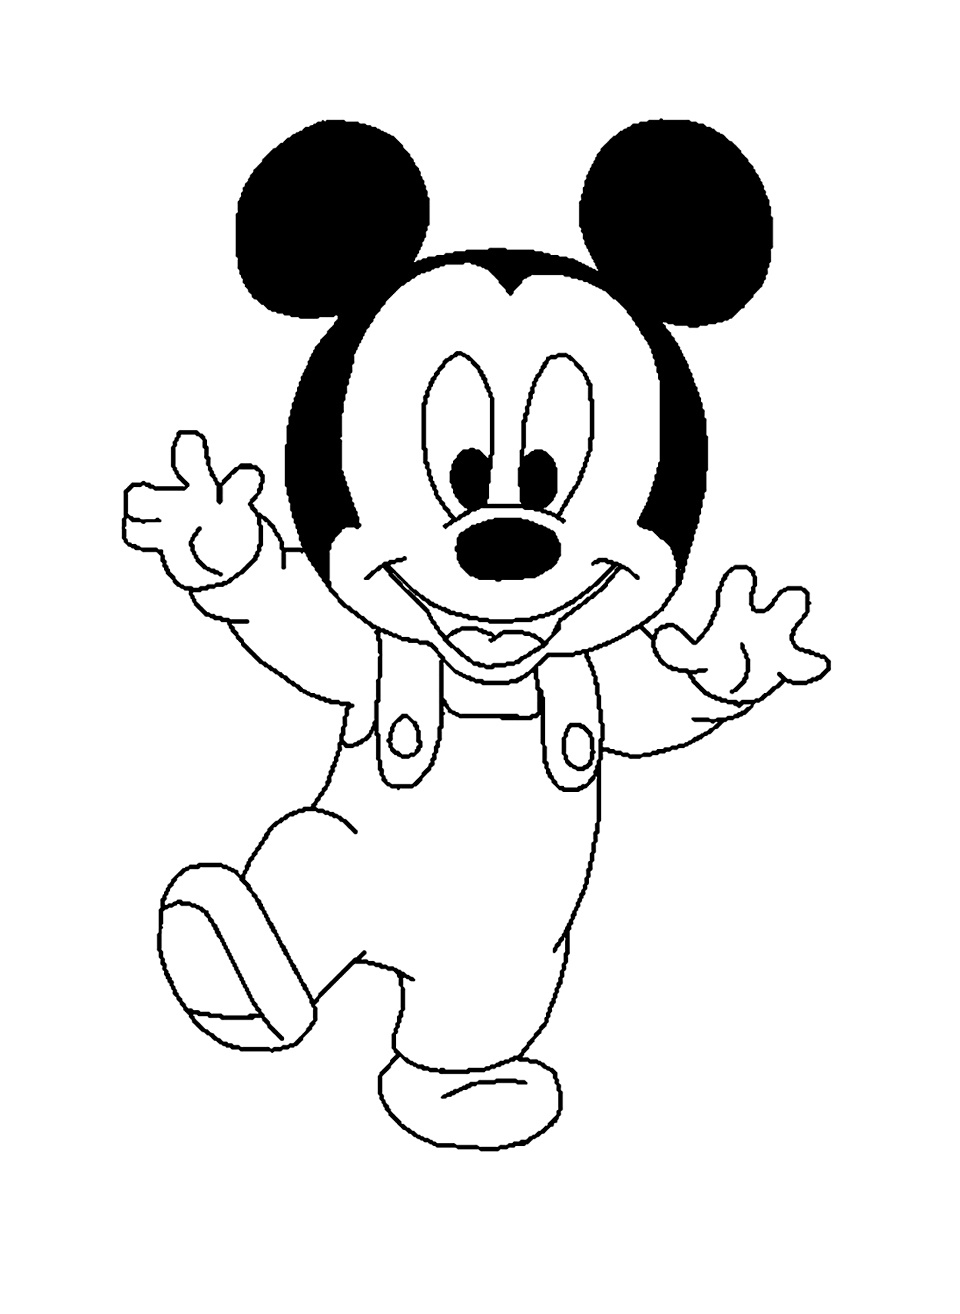 image=mickey Coloring for kids mickey 1